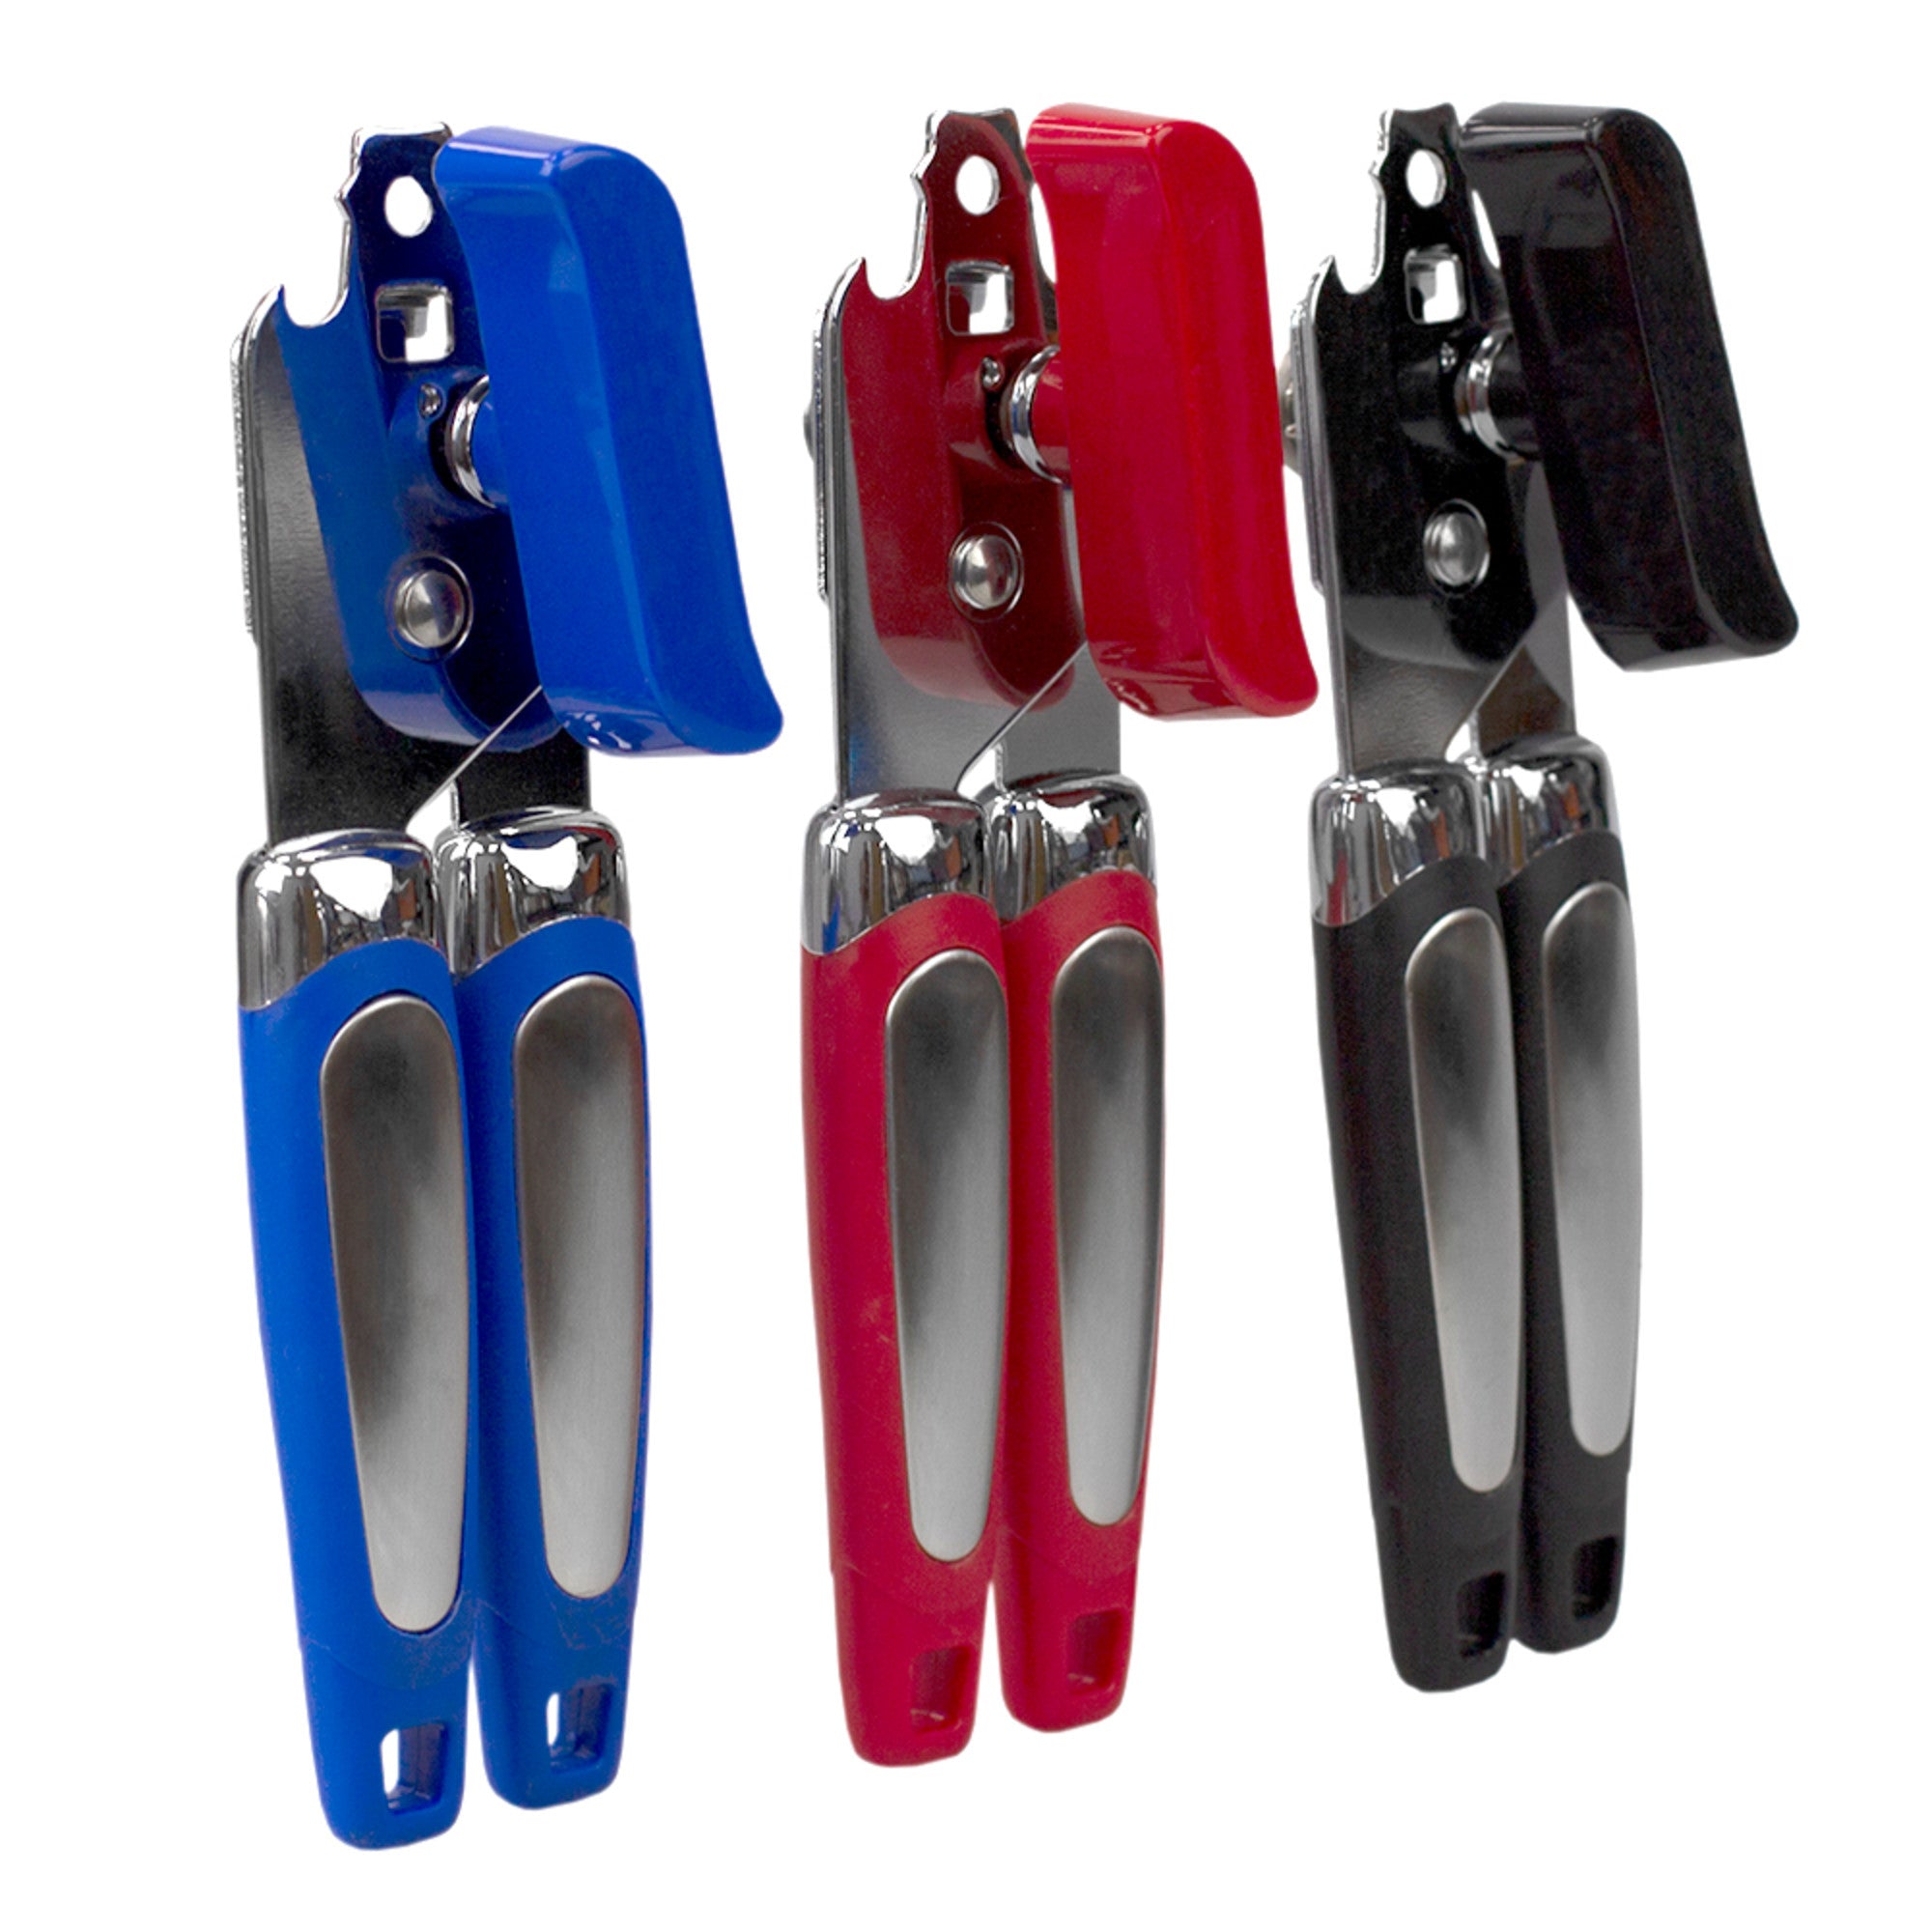 Home Basics Can Opener - Assorted Colors